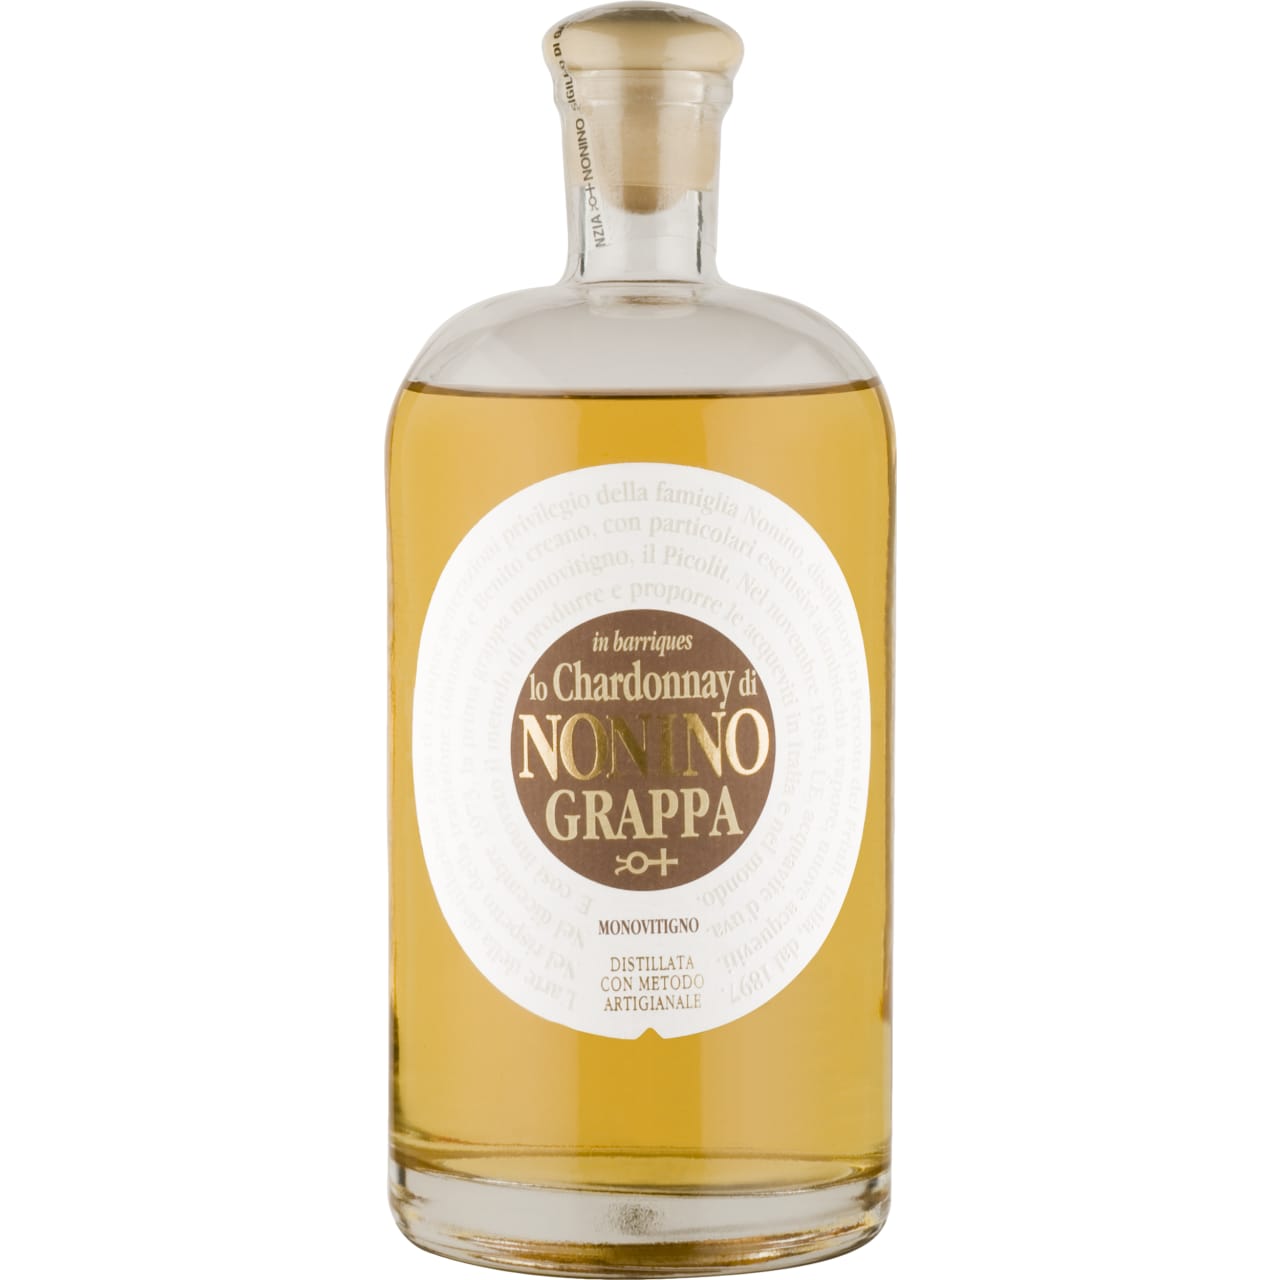 This Nonino Grappa is produced using the pomace from the Chardonnay grape, and aged between 8 and 10 months in barriques to take on flavour and character from the cask.